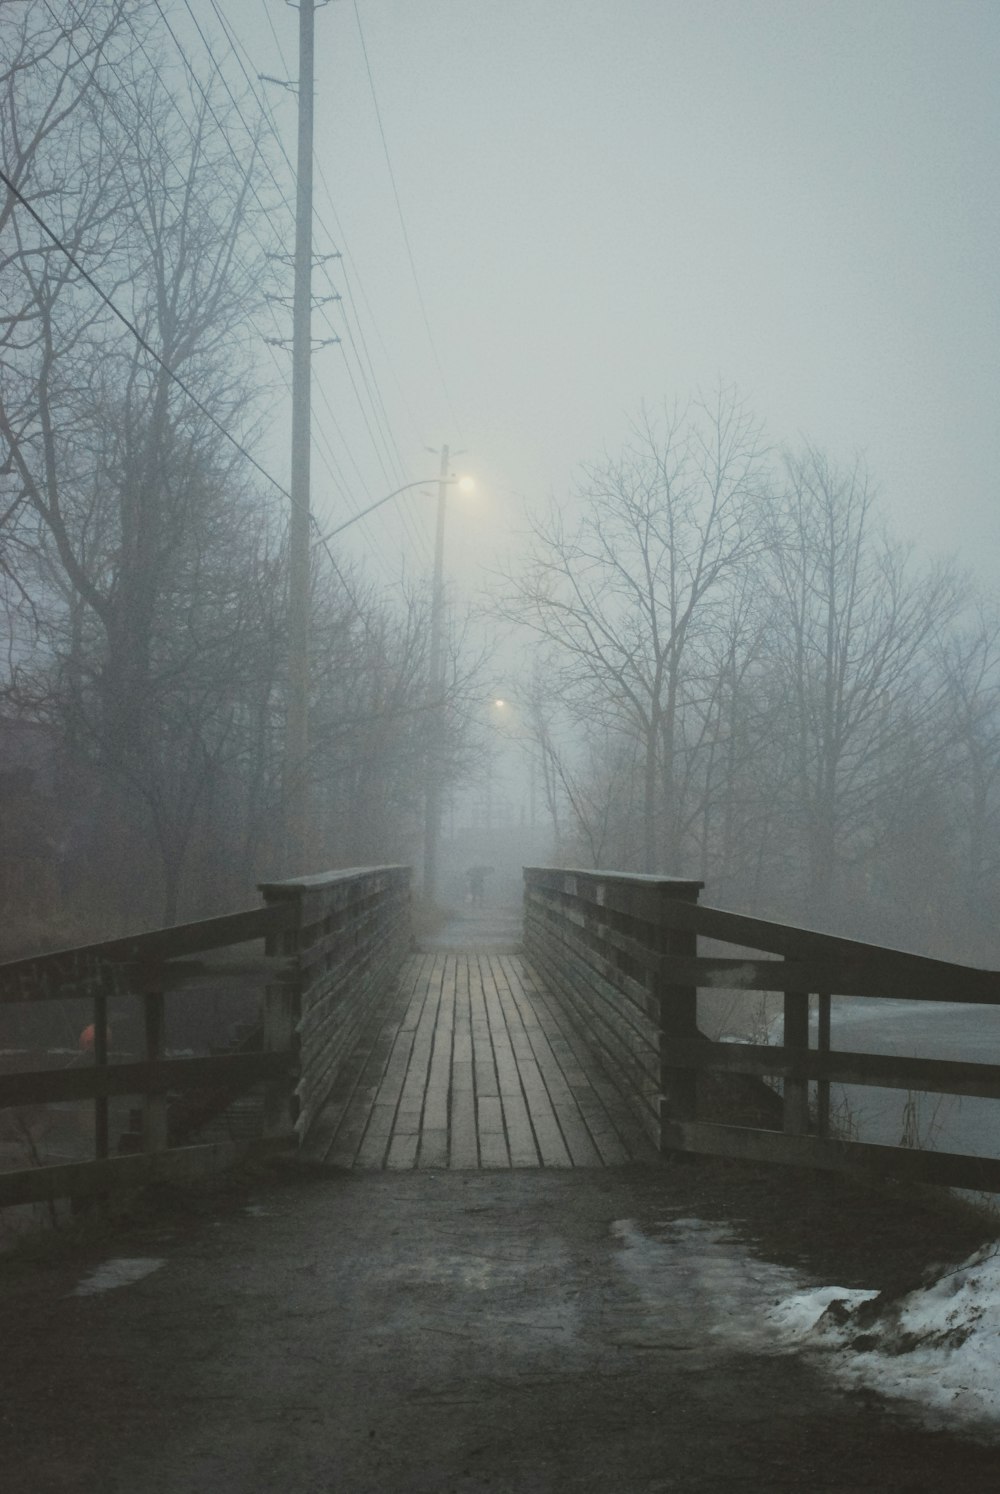 a foggy bridge with a street light in the distance